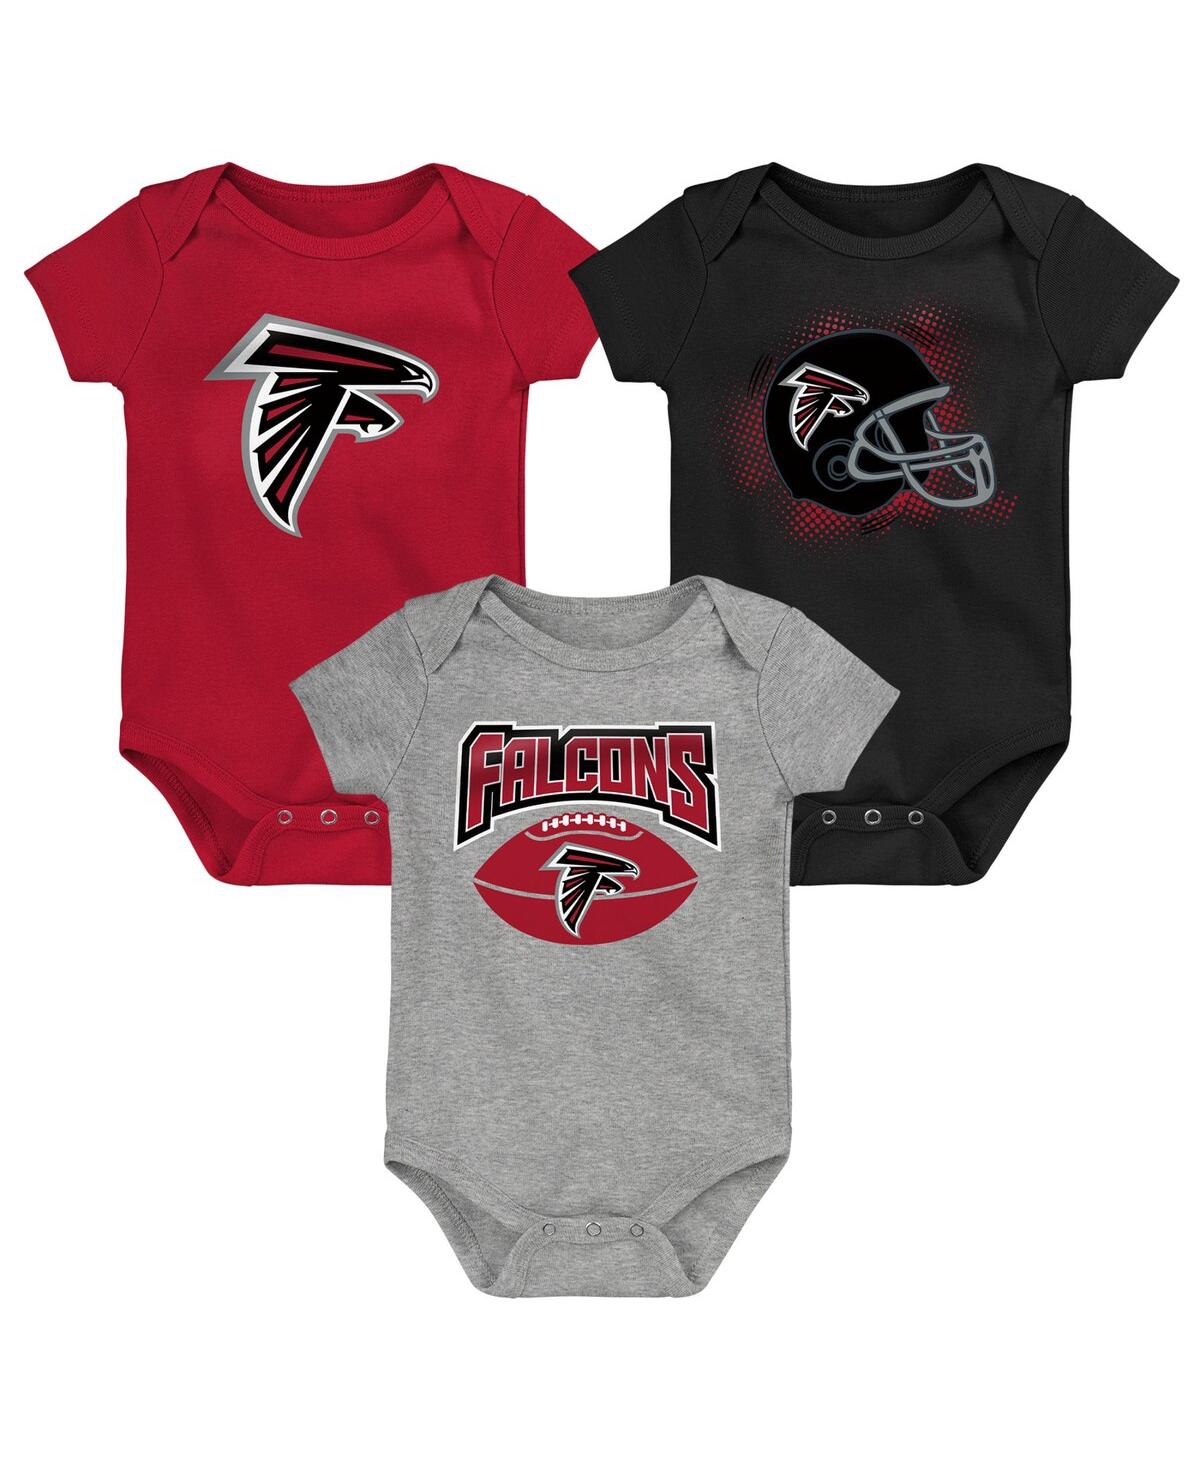 OUTERSTUFF INFANT BOYS AND GIRLS RED, BLACK, HEATHERED GRAY ATLANTA FALCONS 3-PACK GAME ON BODYSUIT SET